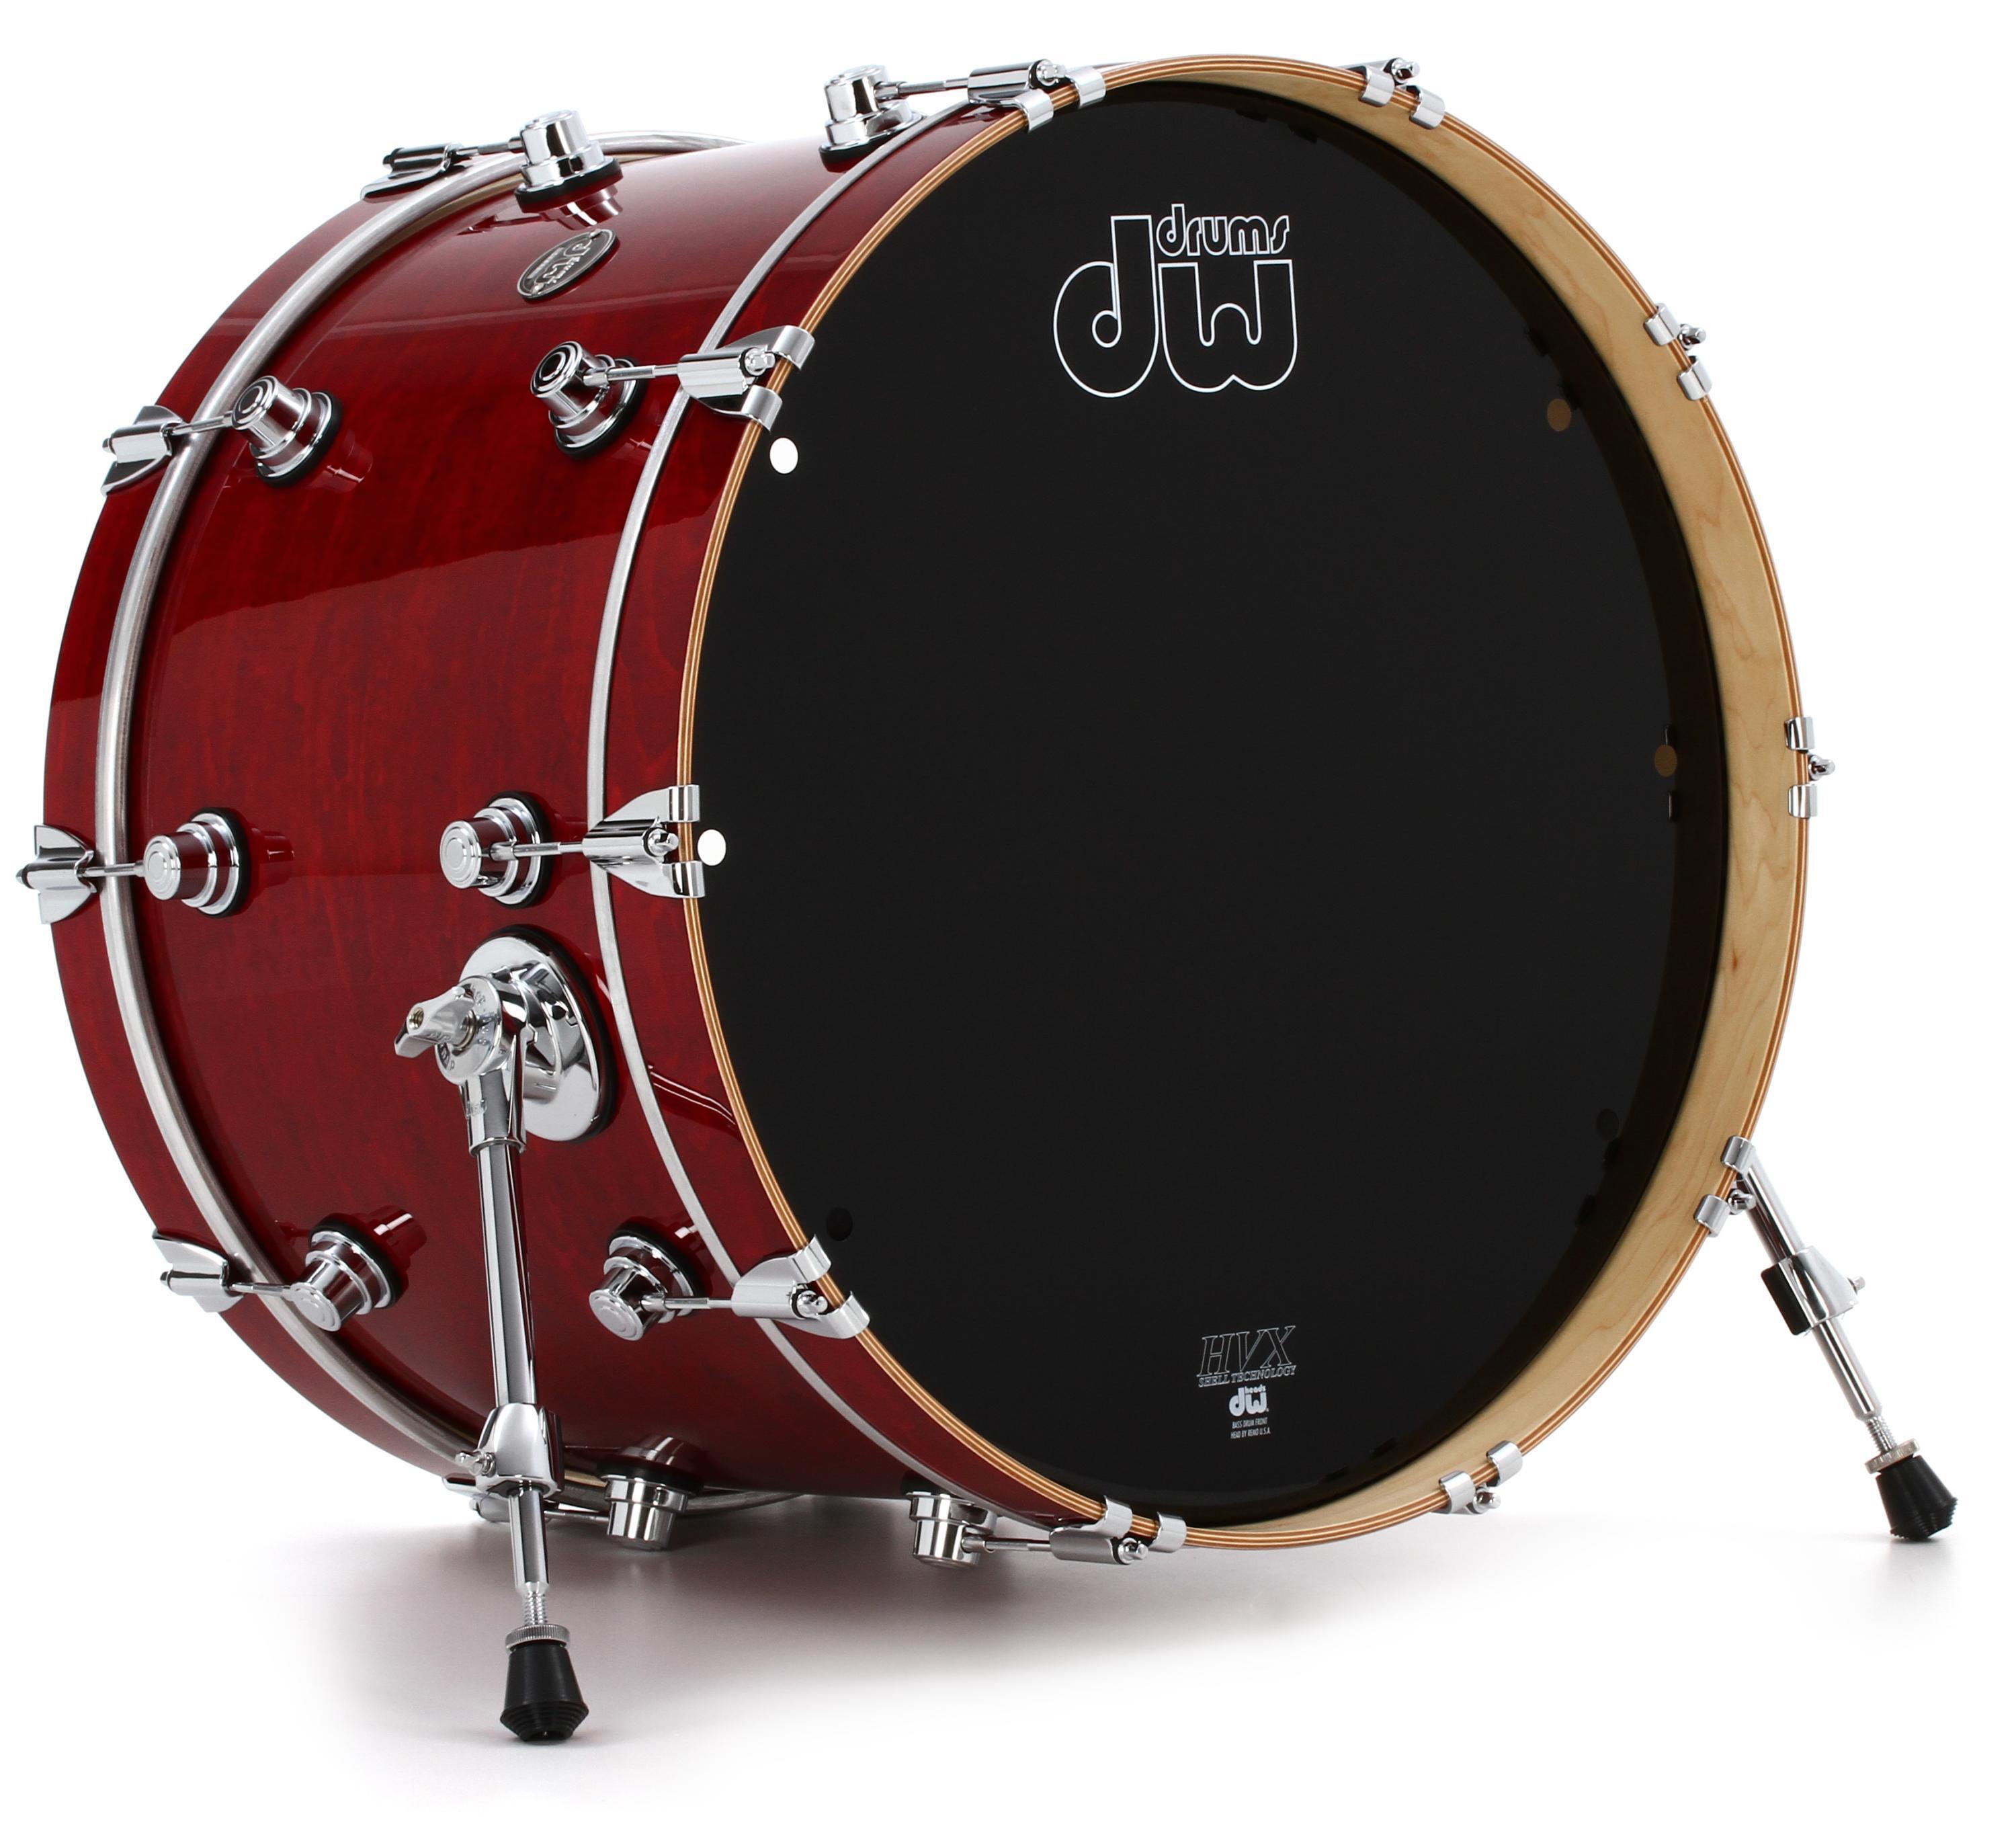 DW Performance Series Bass Drum - 14 x 22 inch - Cherry Stain Lacquer ...